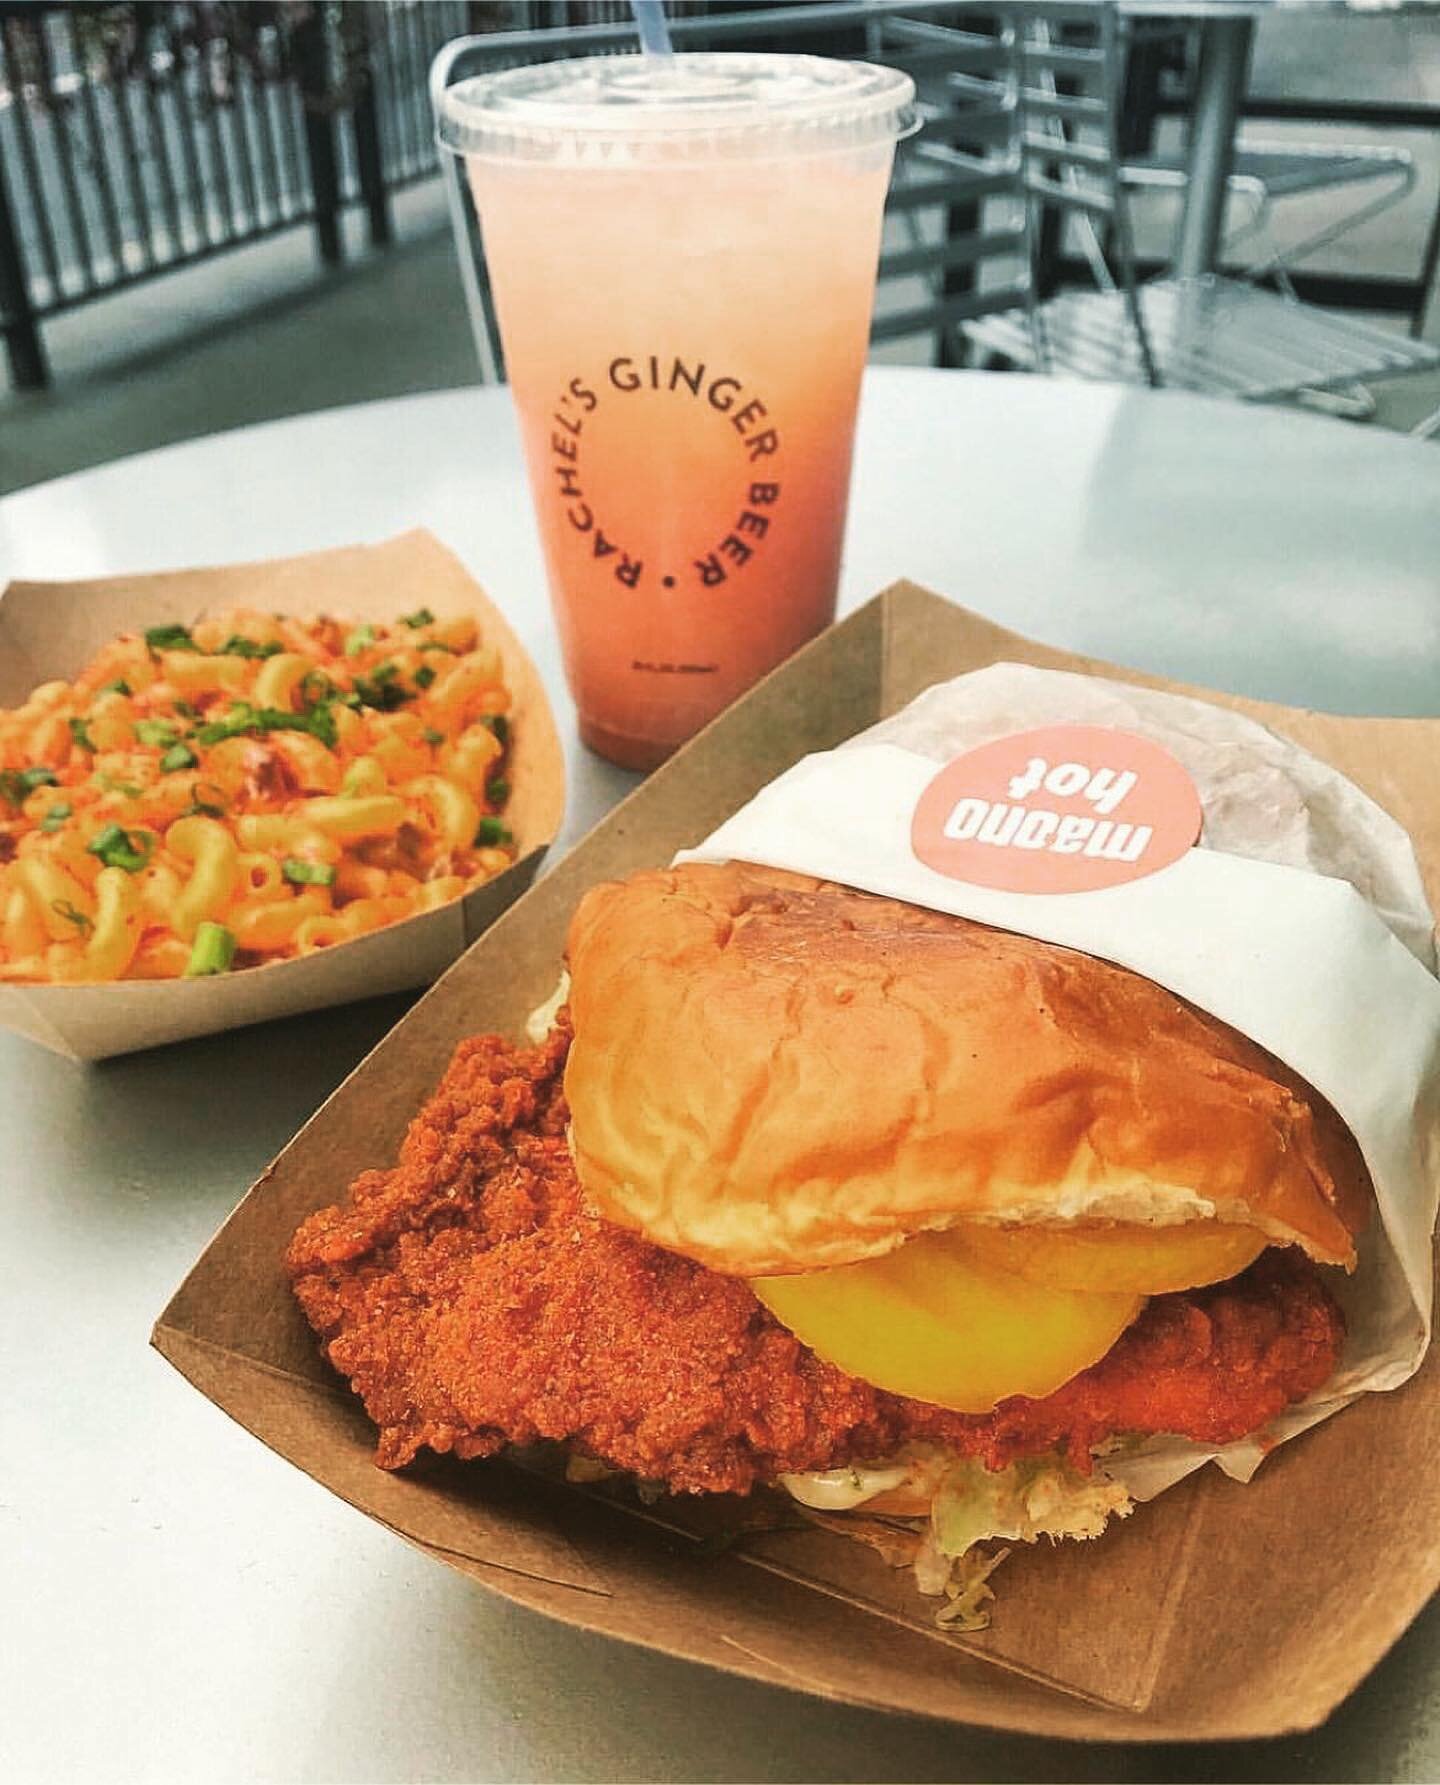 We agree @curiocityseattle! 🔥

Wouldn&rsquo;t be Wednesday without @maonoseattle and @rgbsoda, are we right? Photo by @grubbinseattle #seattle

#maono #friedchicken #friedchickensandwich
#chickensandwich #chicken #instafood #hawaiian #hawaiianinspir